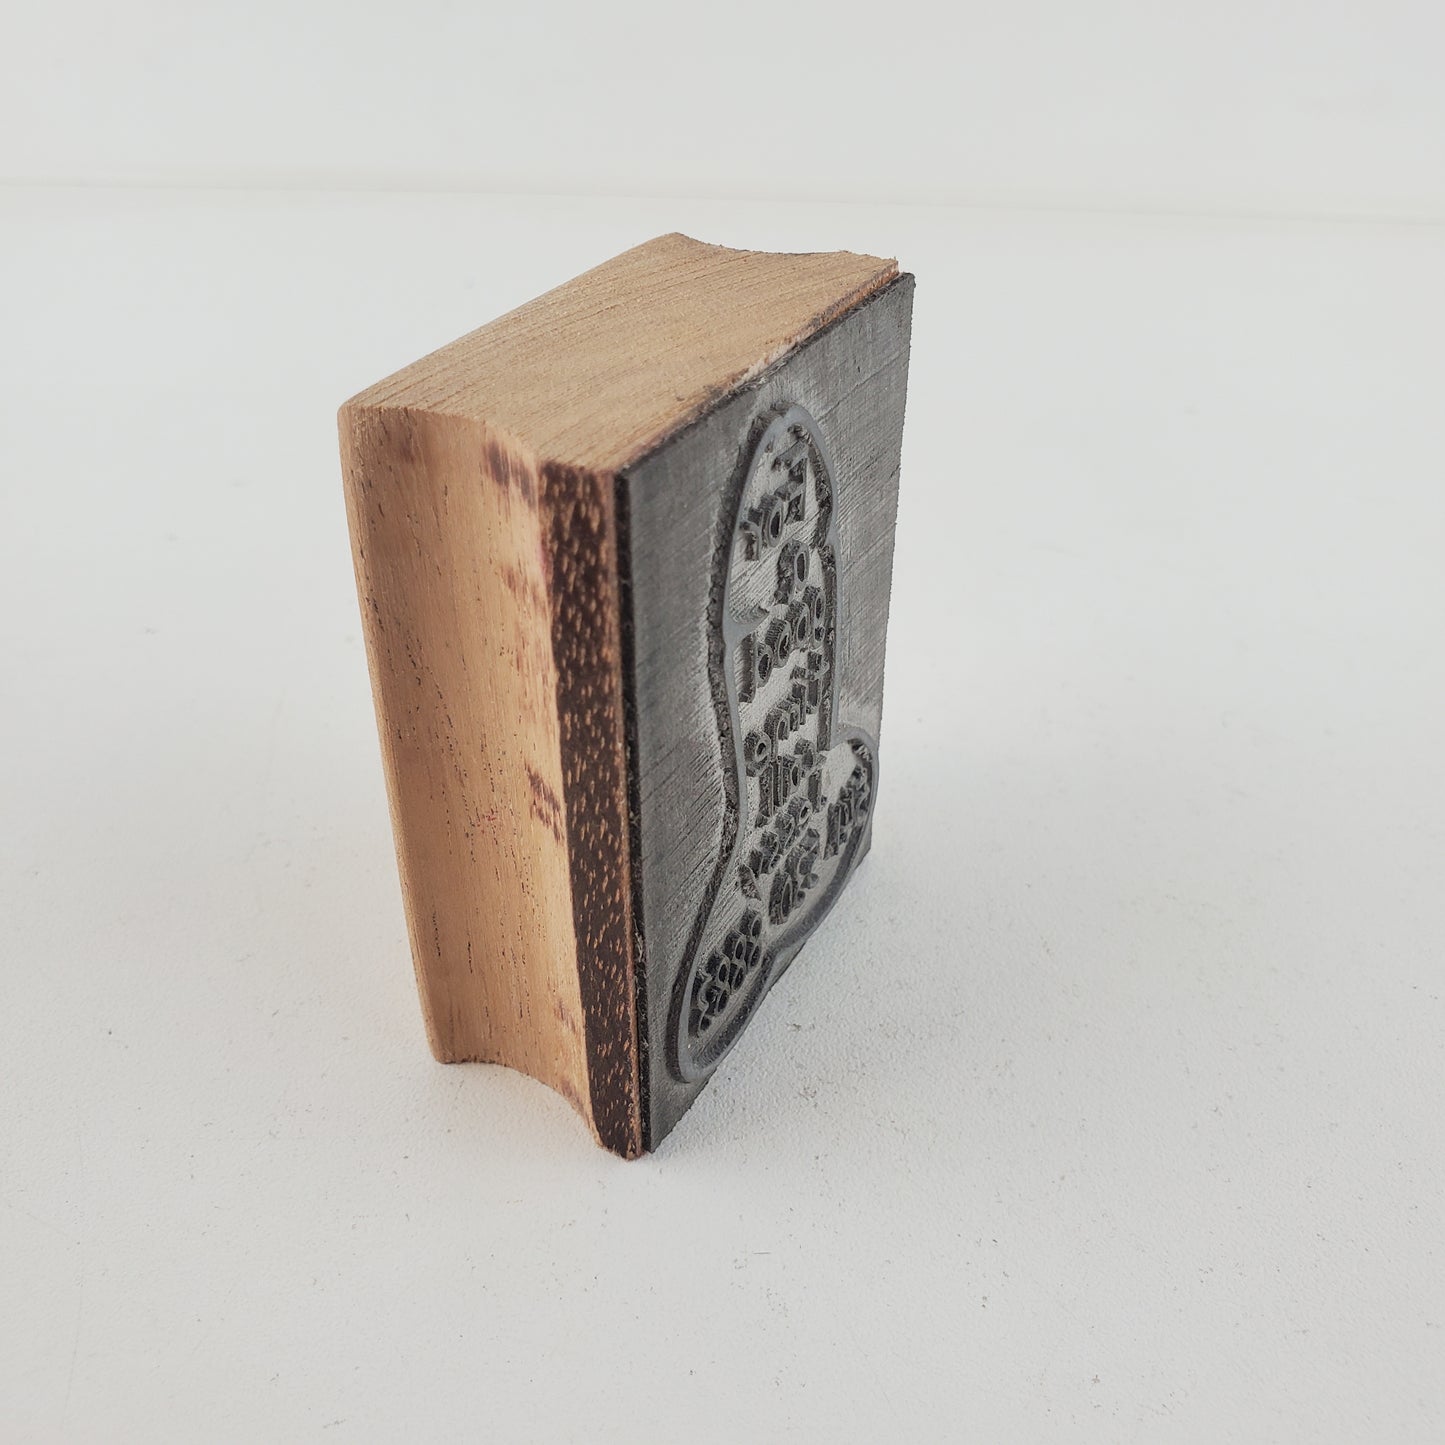 For a good time rubber stamp